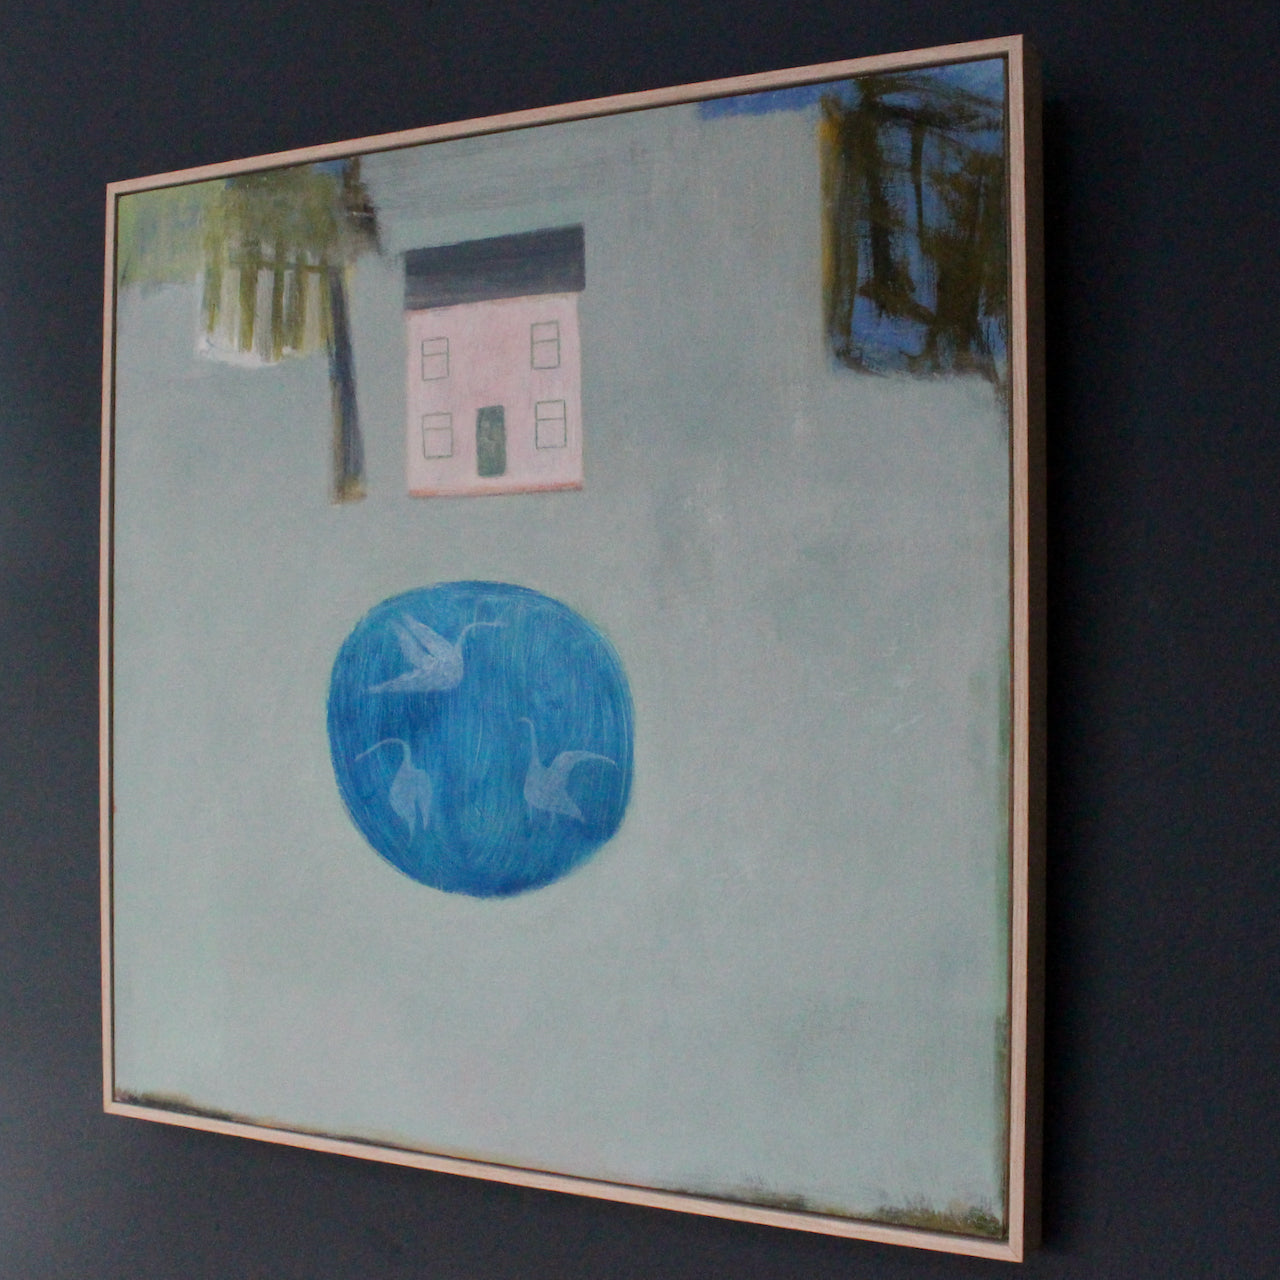 Pale pink house with blue pond and abstract trees by Cornish artist Heath Hearn.